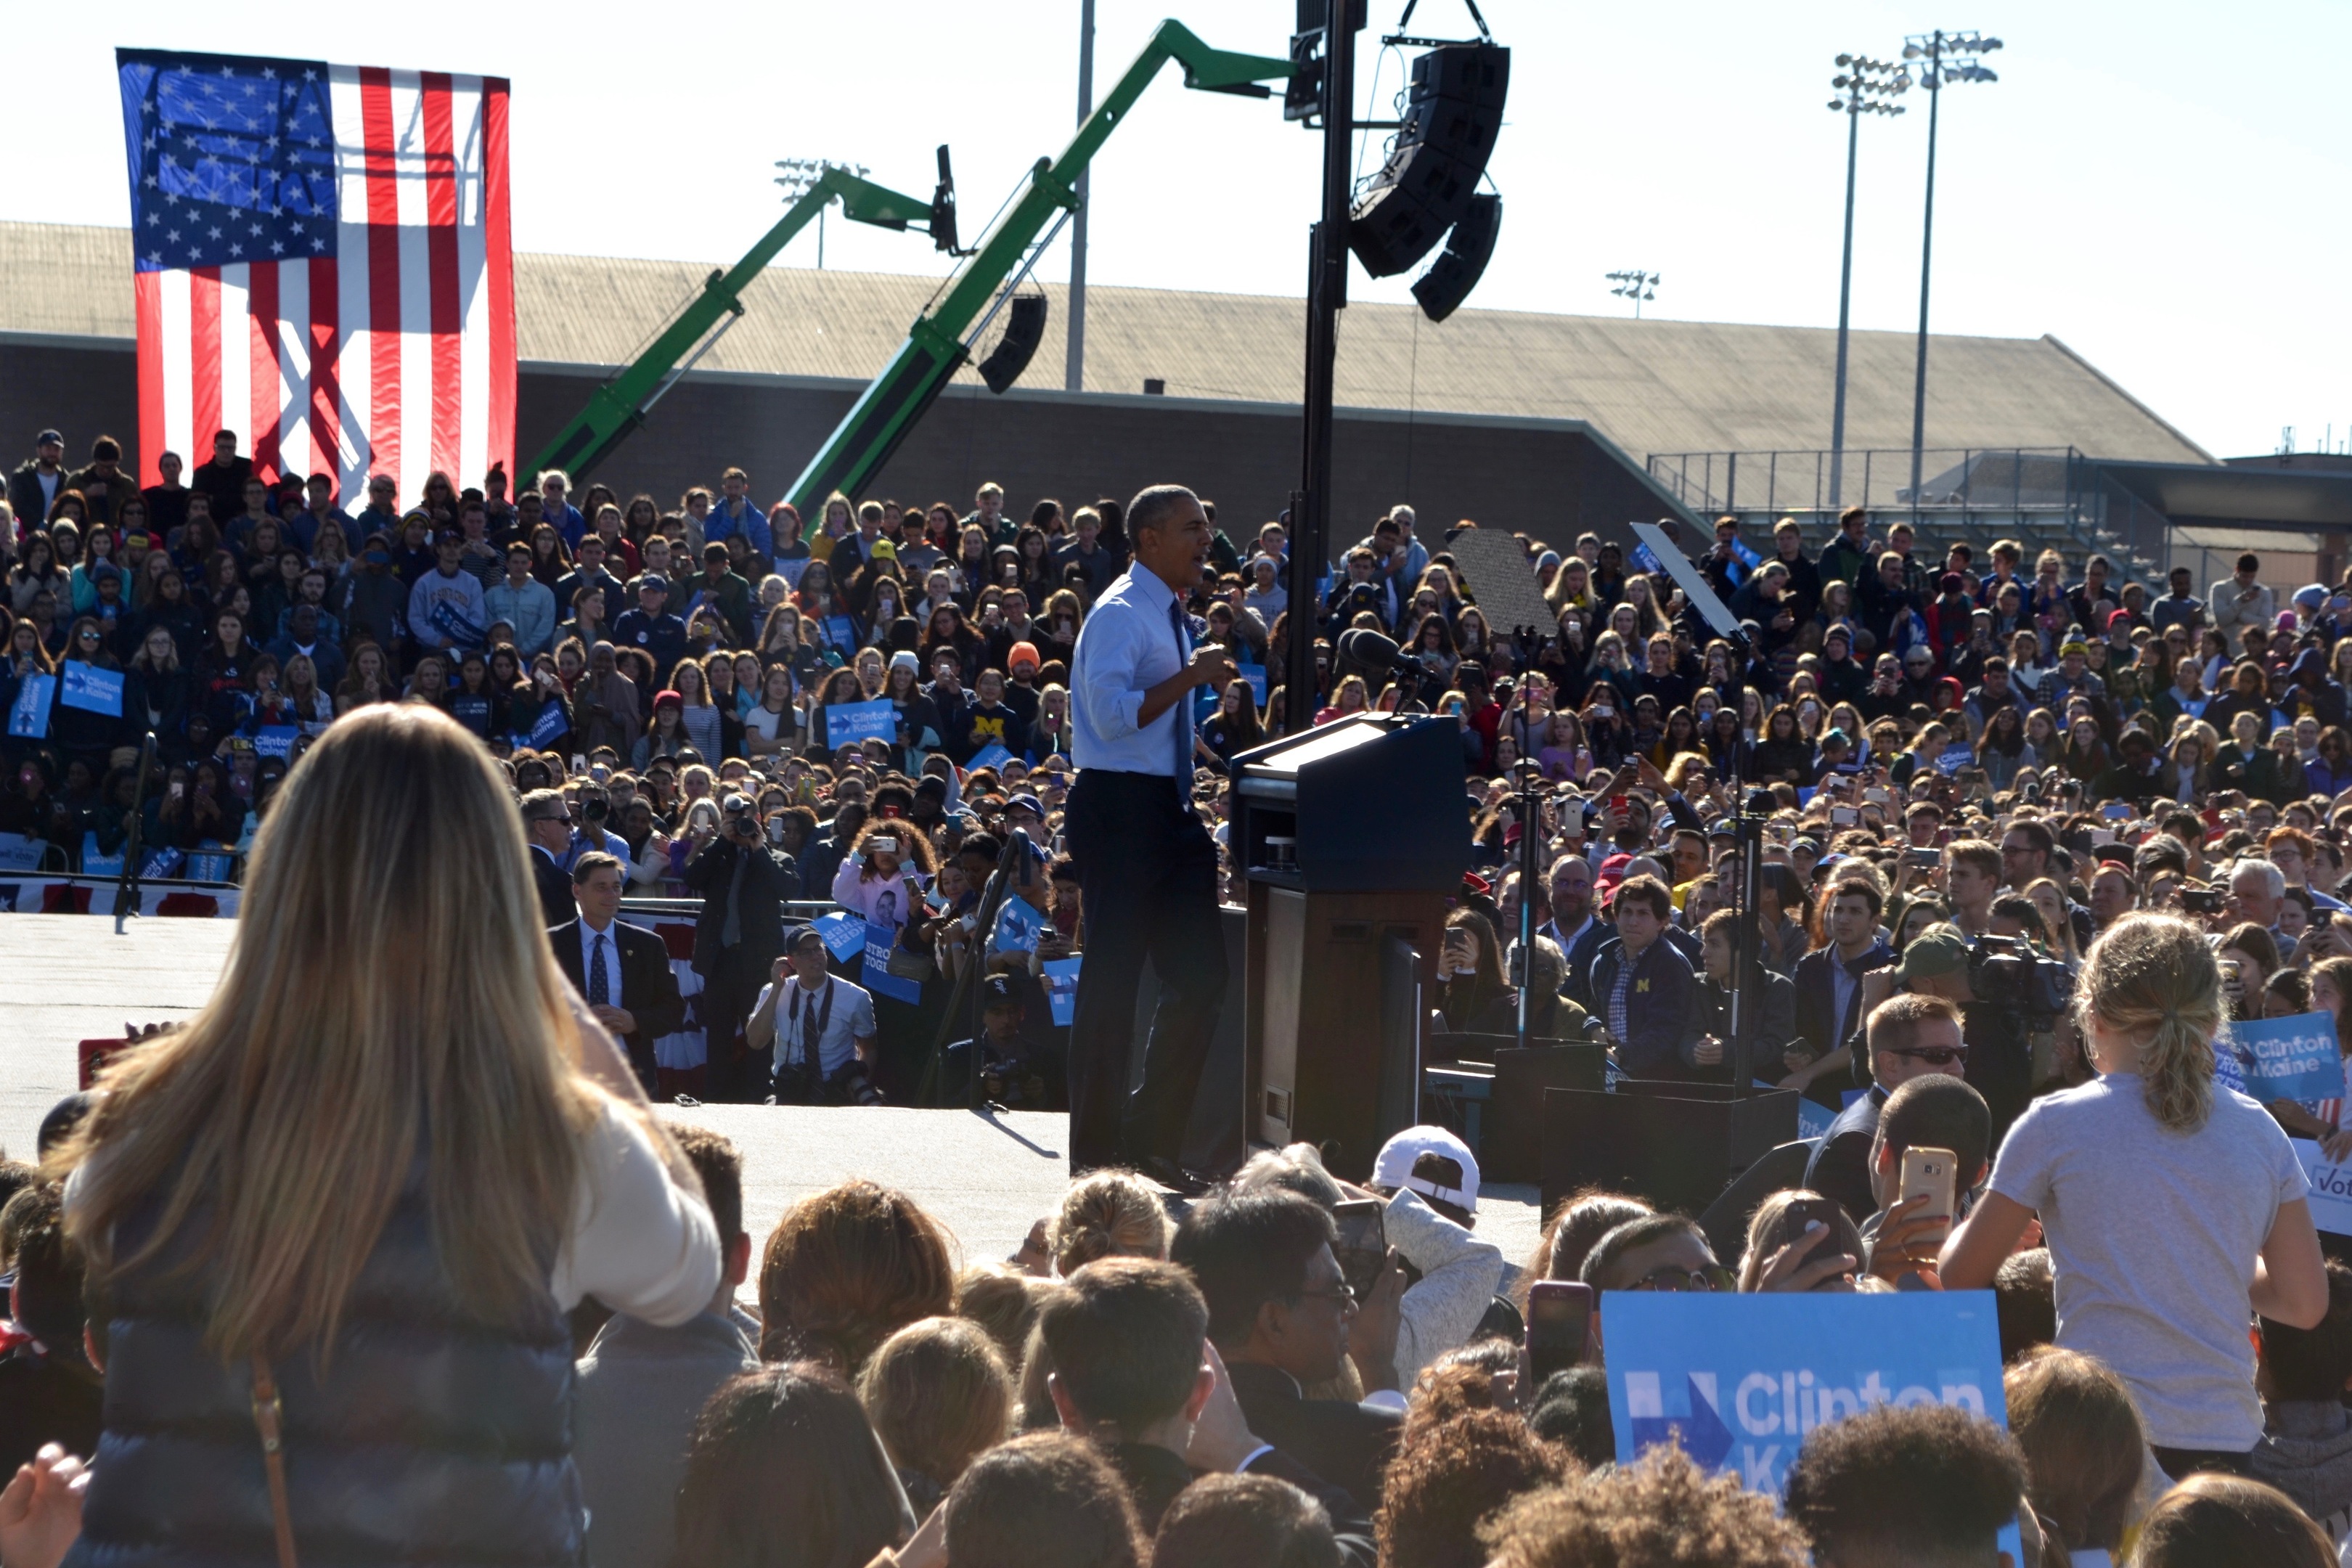 Barack Obama campaigns for Hillary Clinton at the University of Michigan in Ann Arbor.